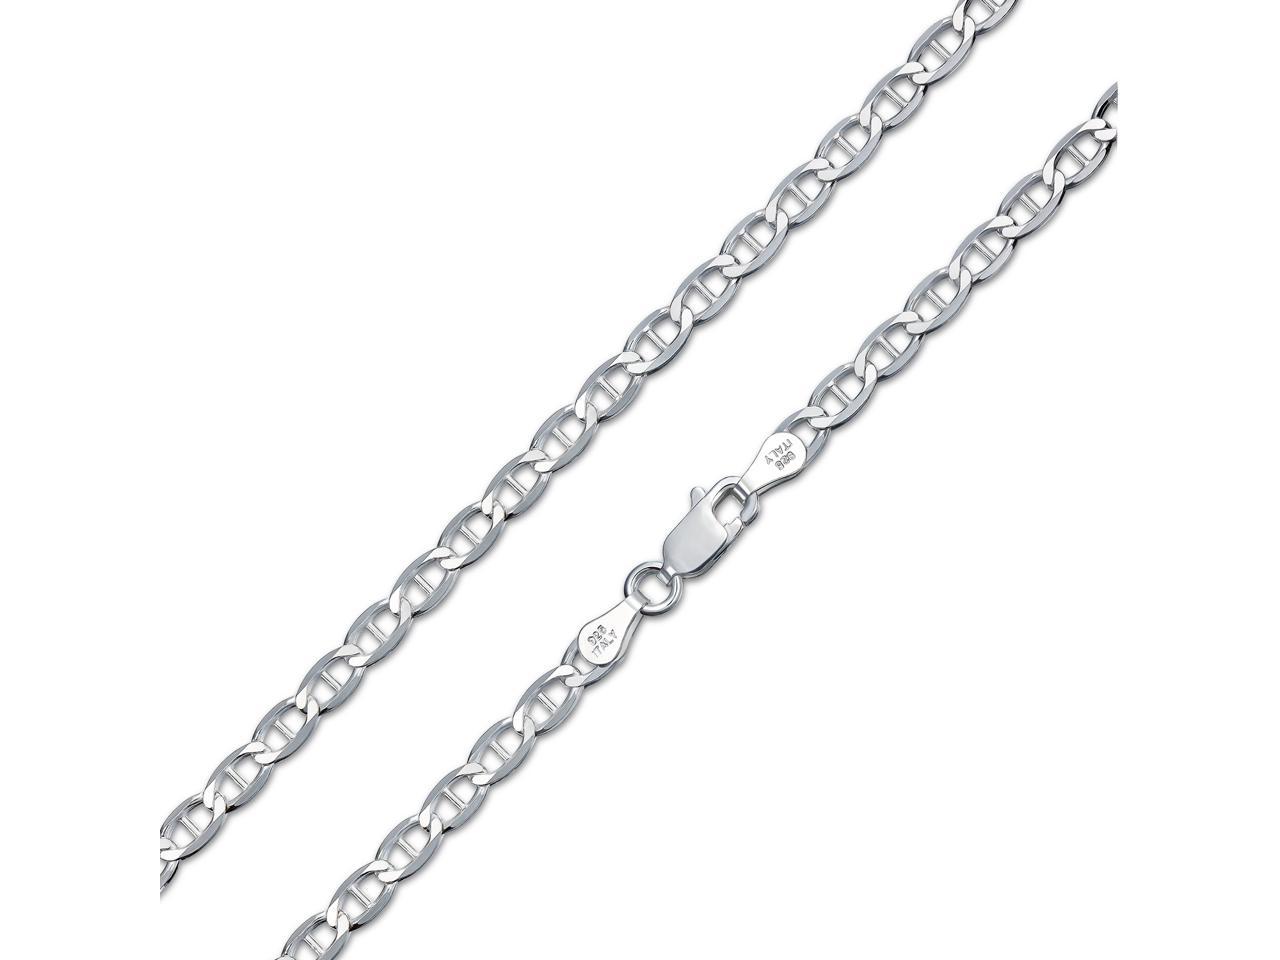 REAL Classic Sterling Silver Marina Chain Necklace Stamped .925 Italy Jewelry 